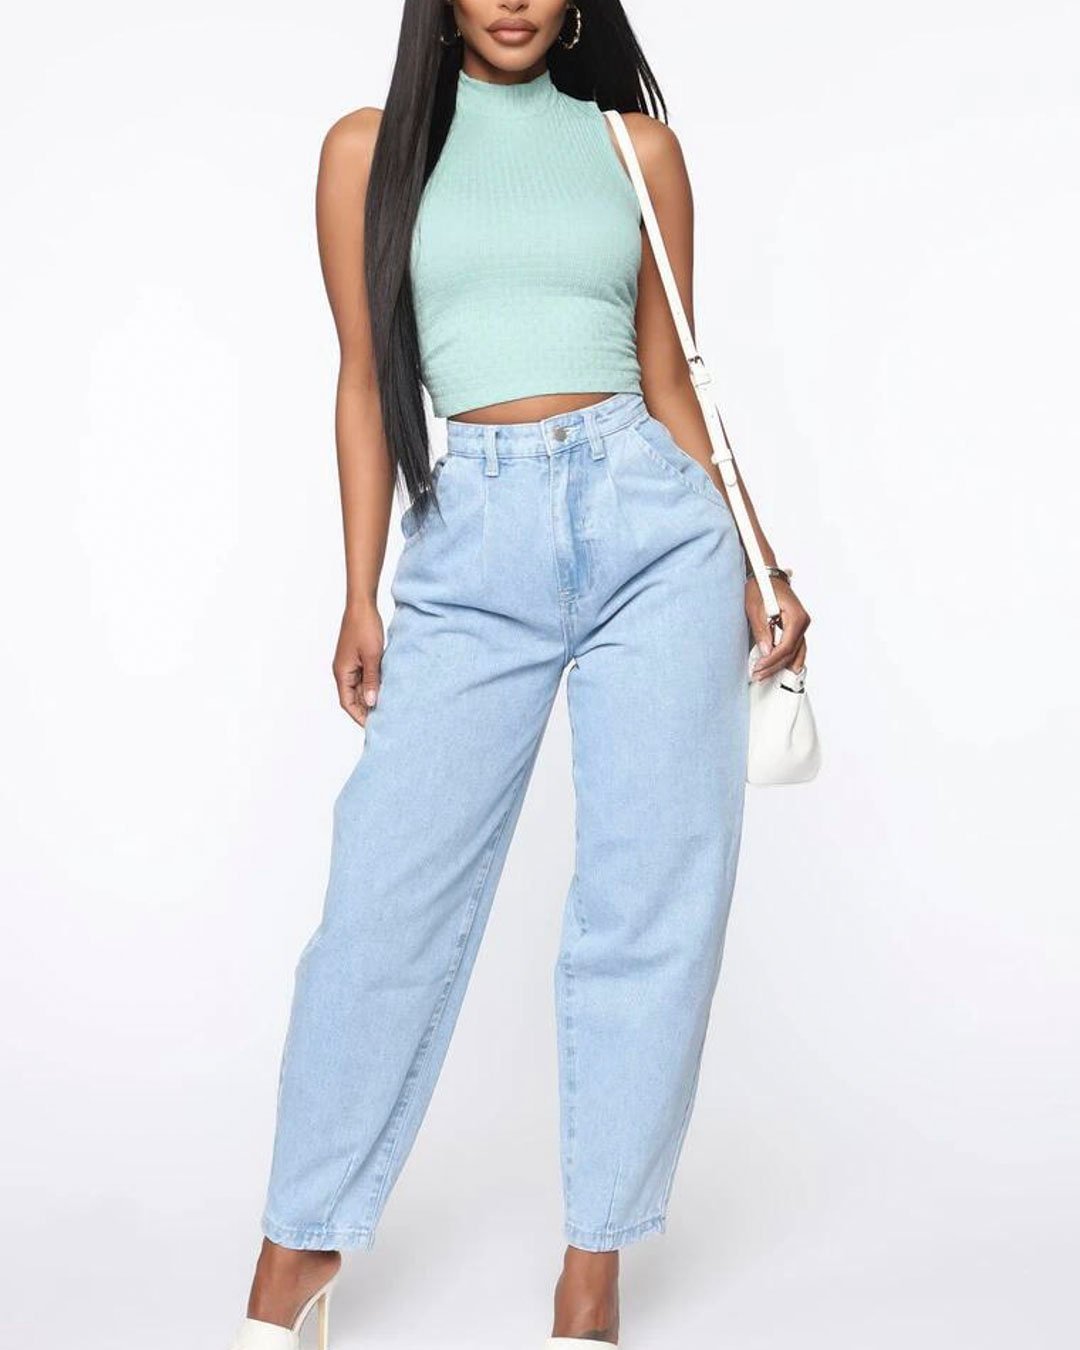 Fashionv-Solid Color Casual Stretch Mid Waist Loose Women's Jeans